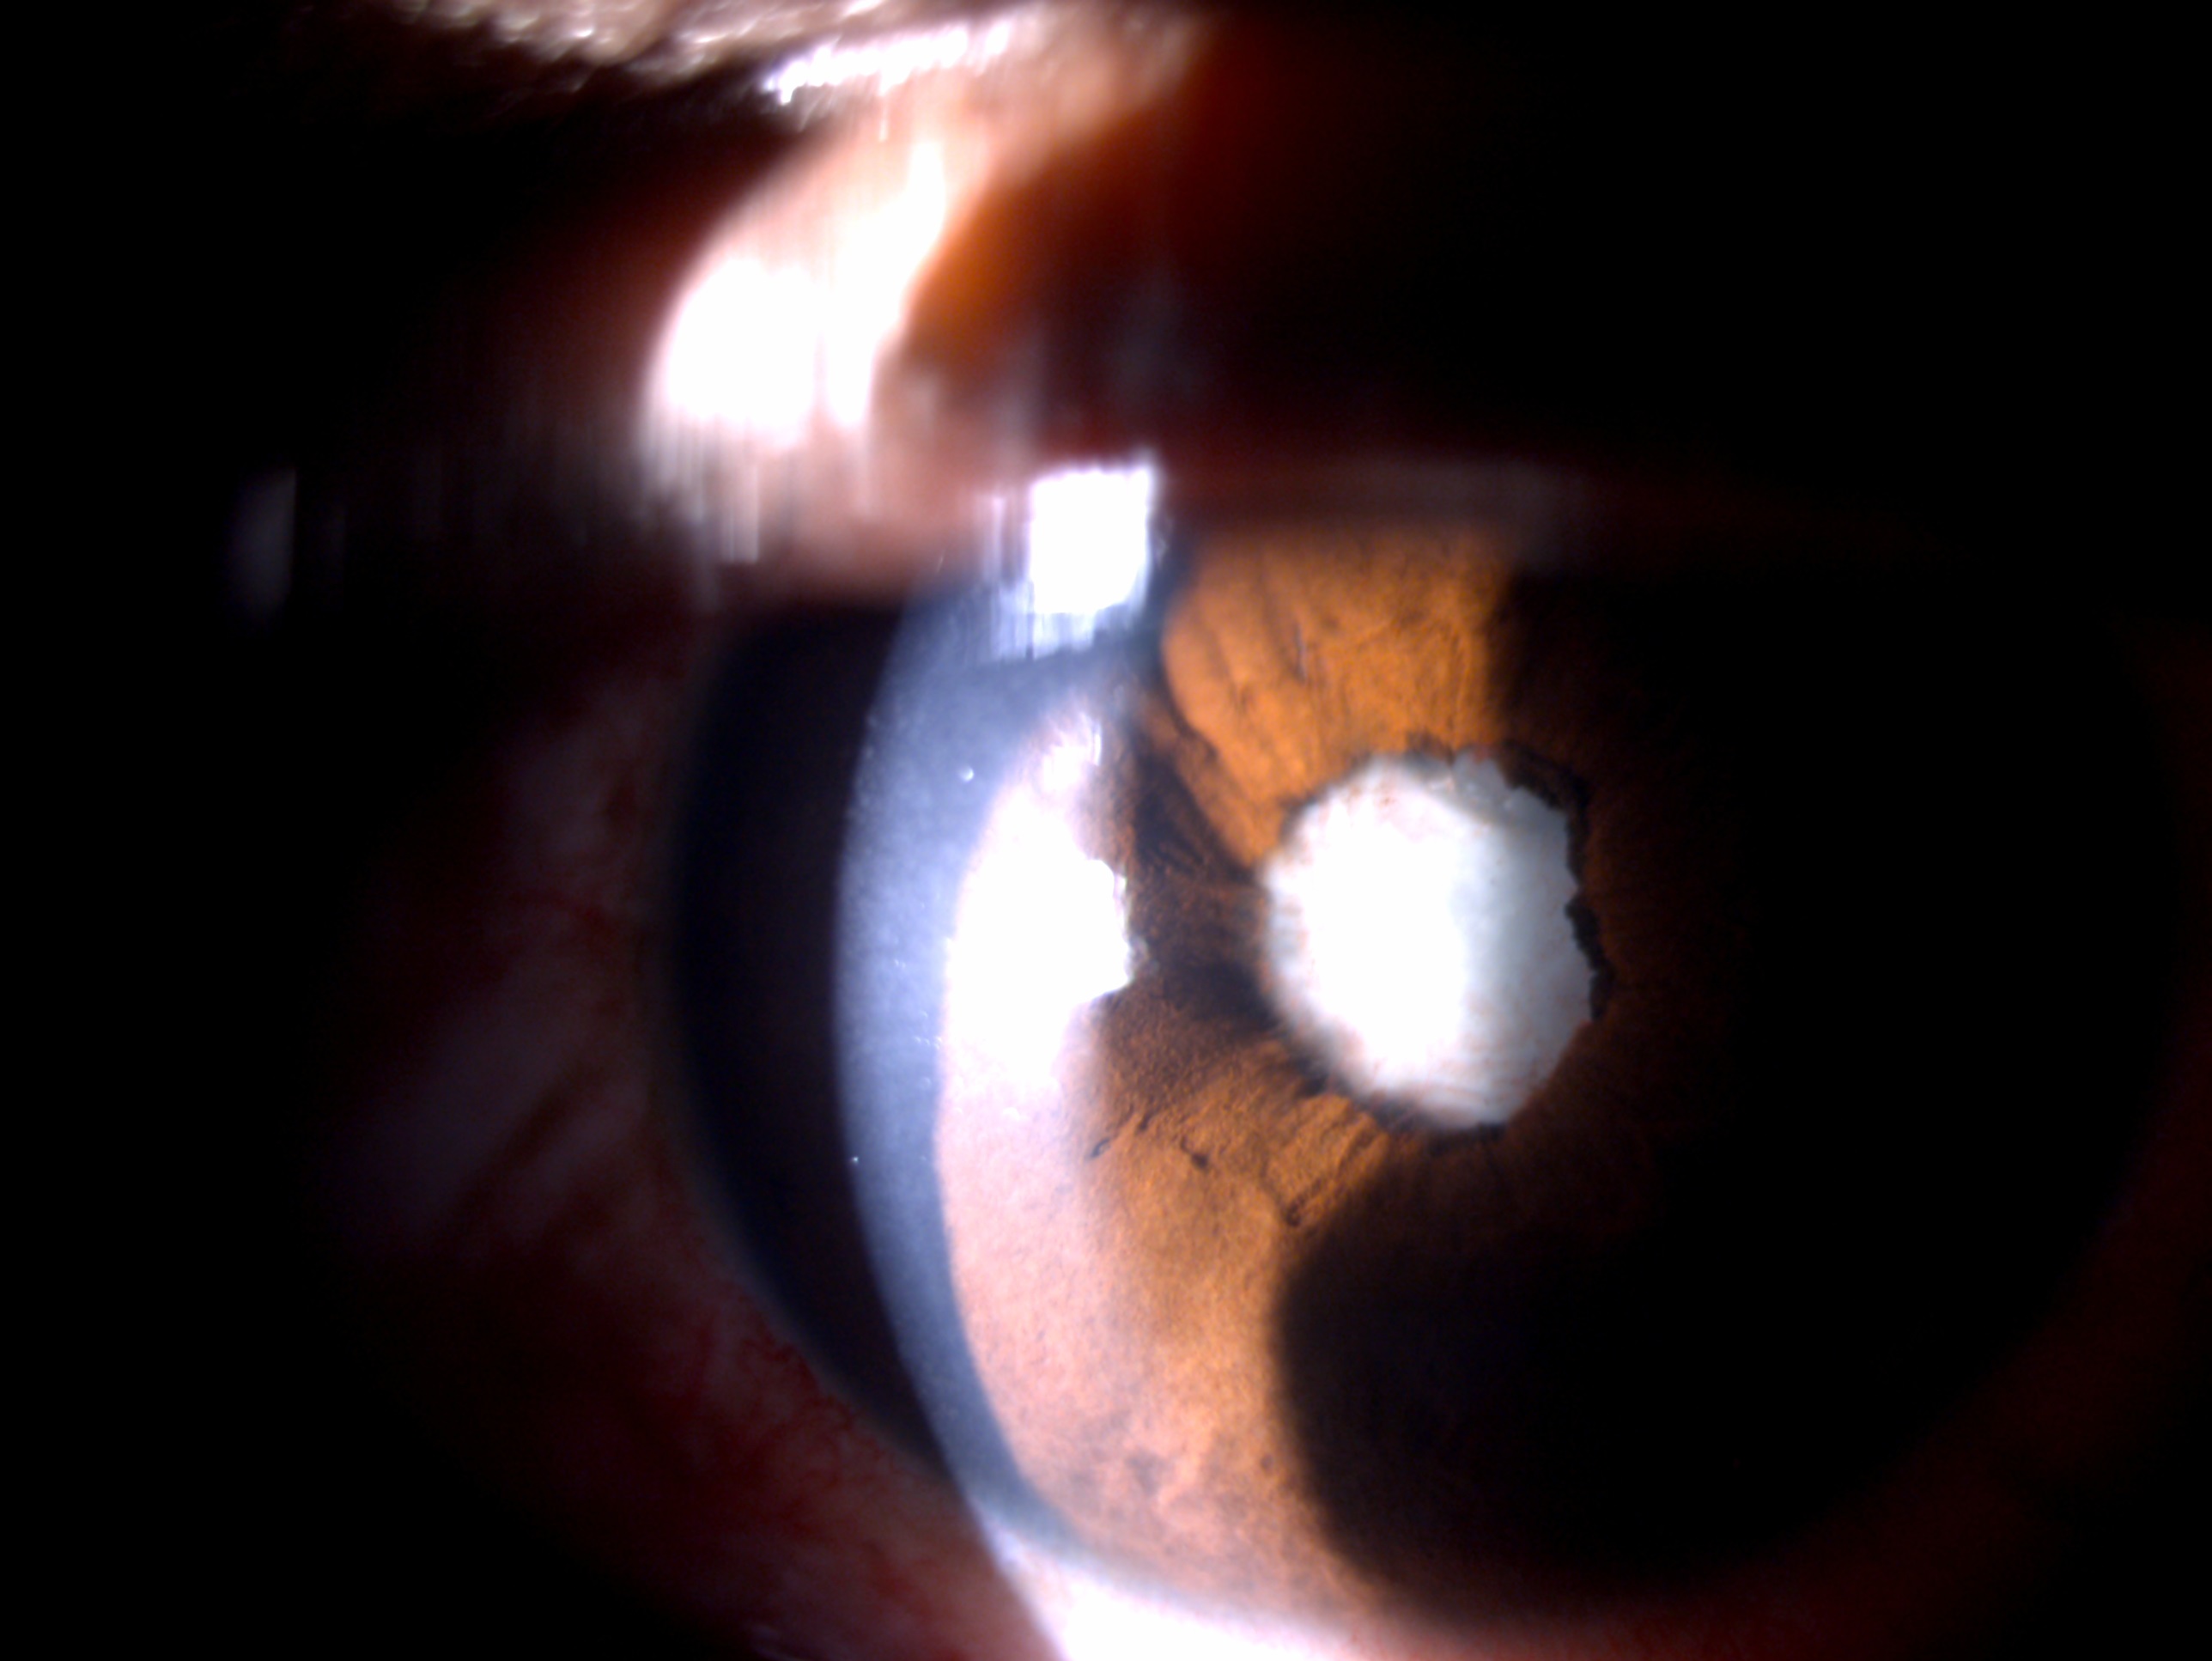 Digital image of the patient depicting a case of lens abscess